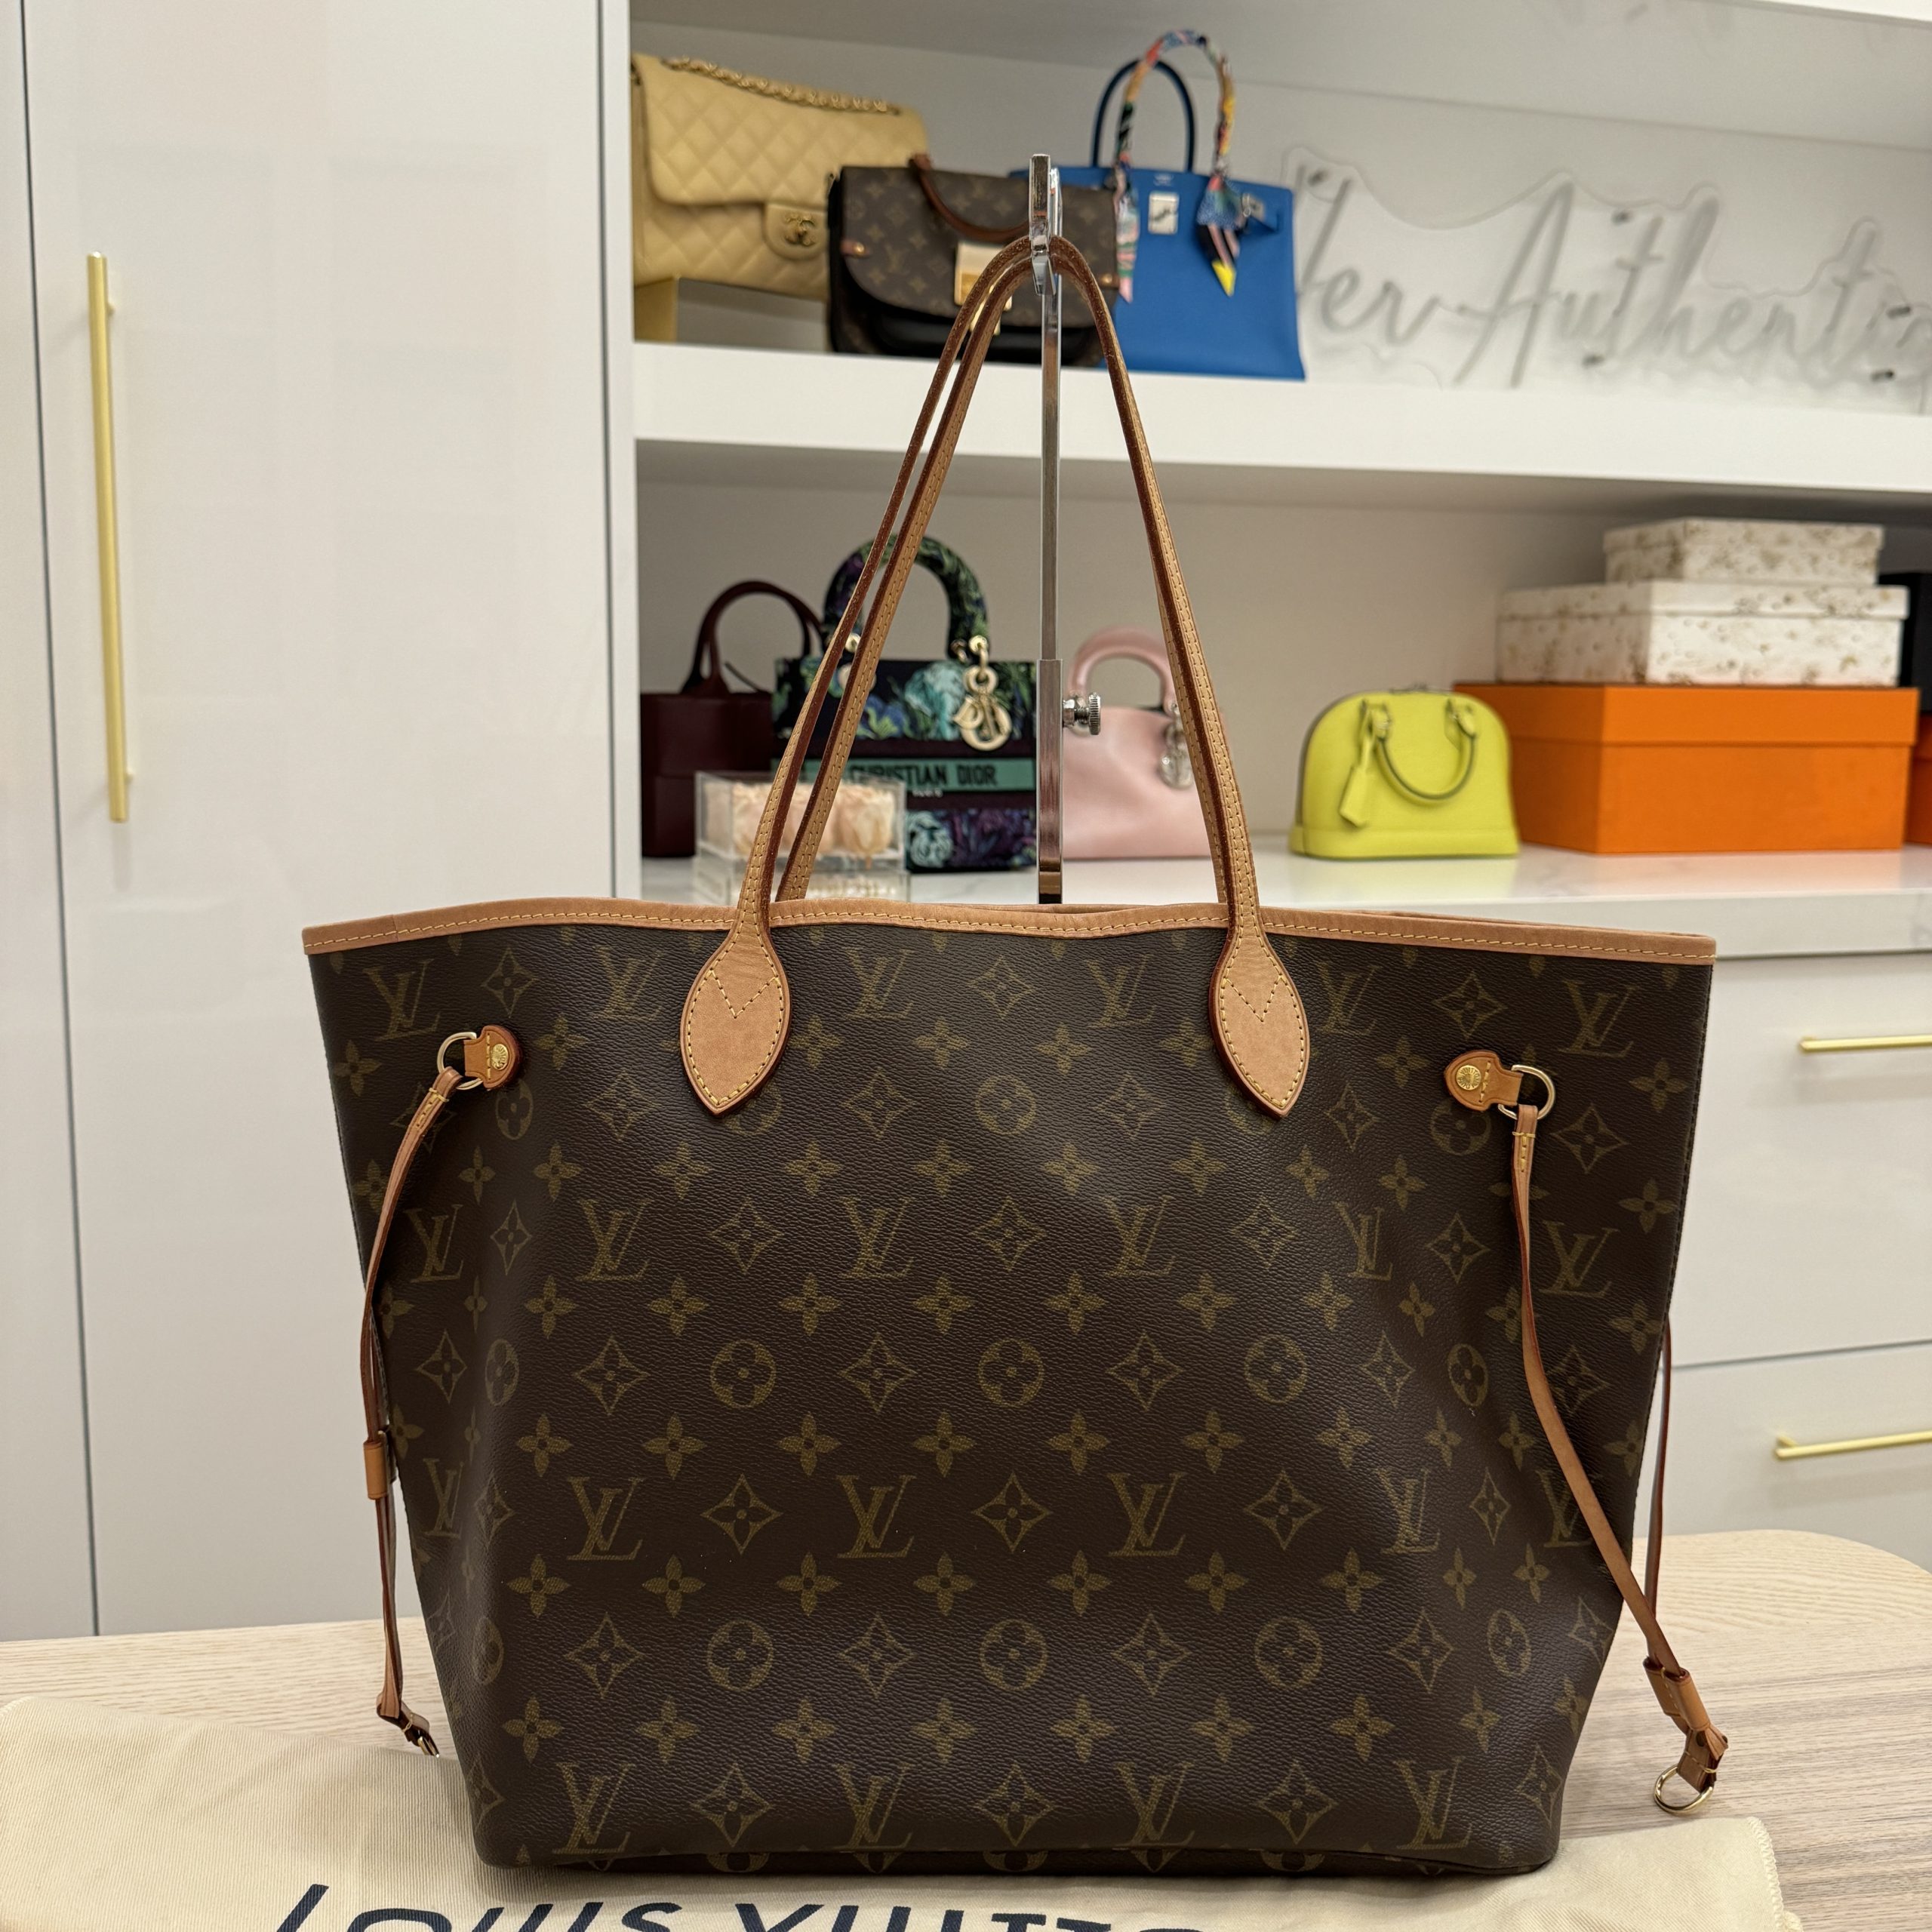 Authentic $2030 Louis Vuitton Neverfull MM Tote Bag Beige